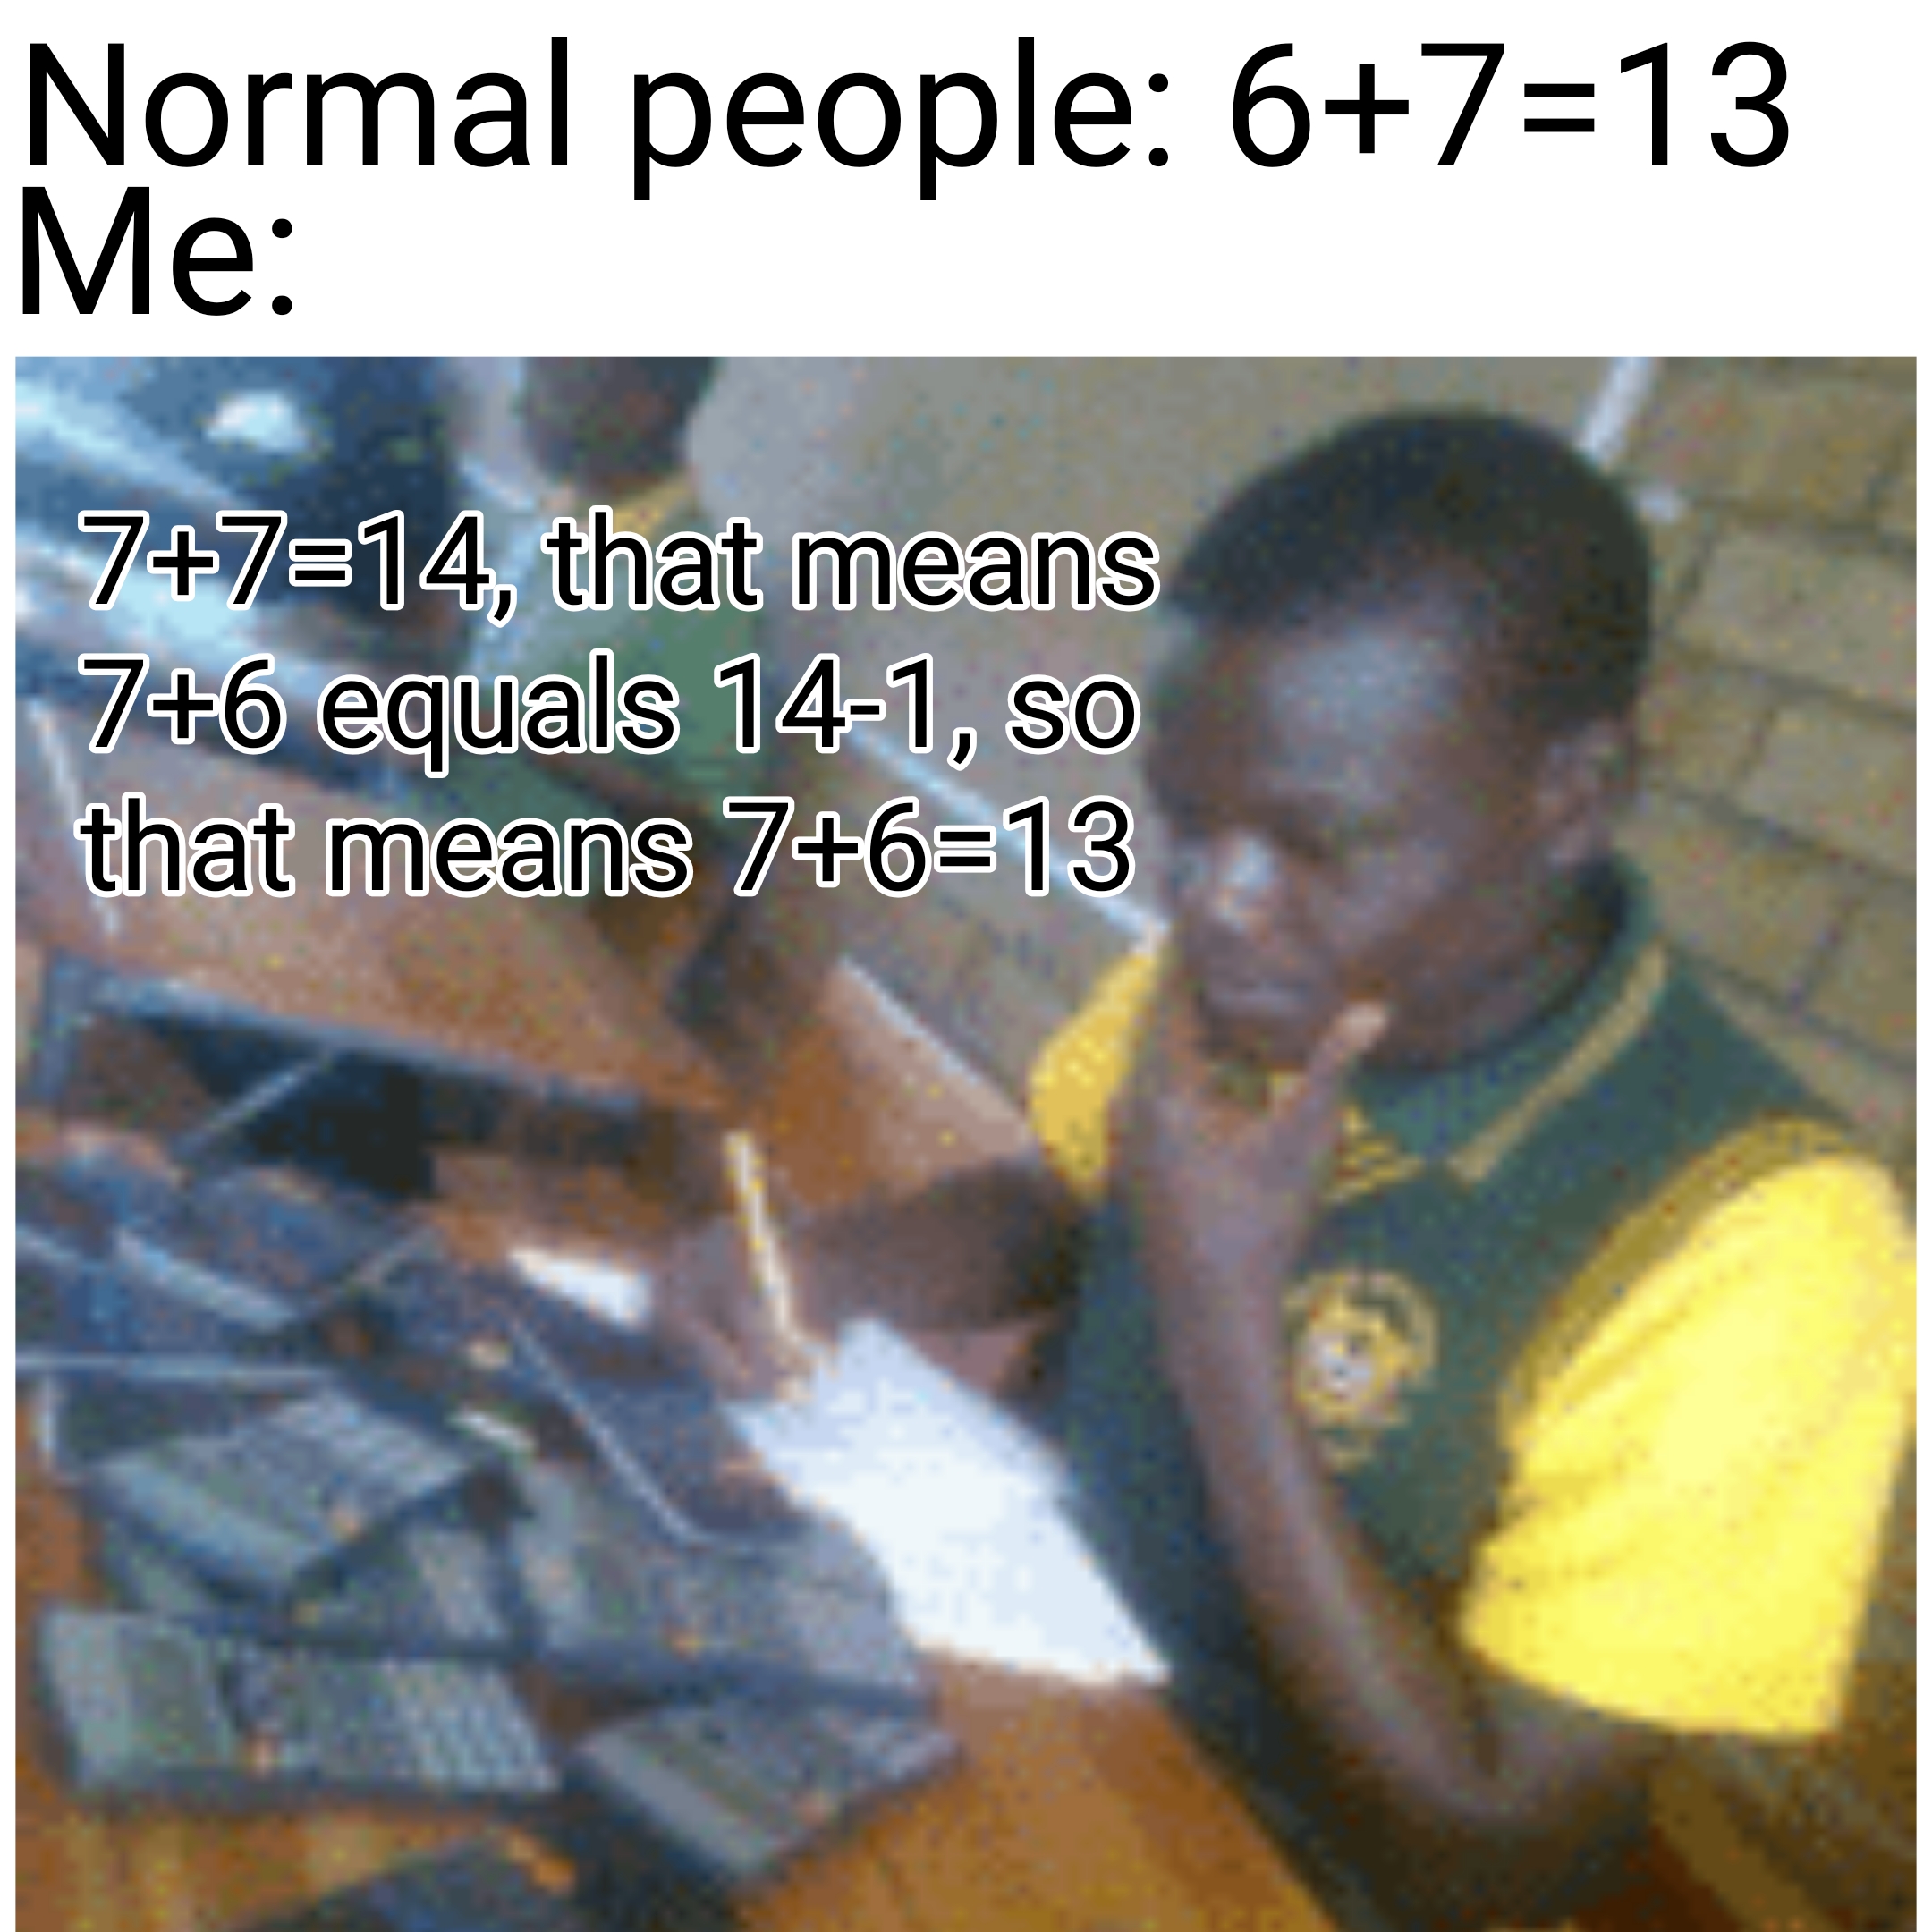 dank memes - confuse your enemies - Normal people 6713 Me 7714, that means 76 equals 141, so that means 7613